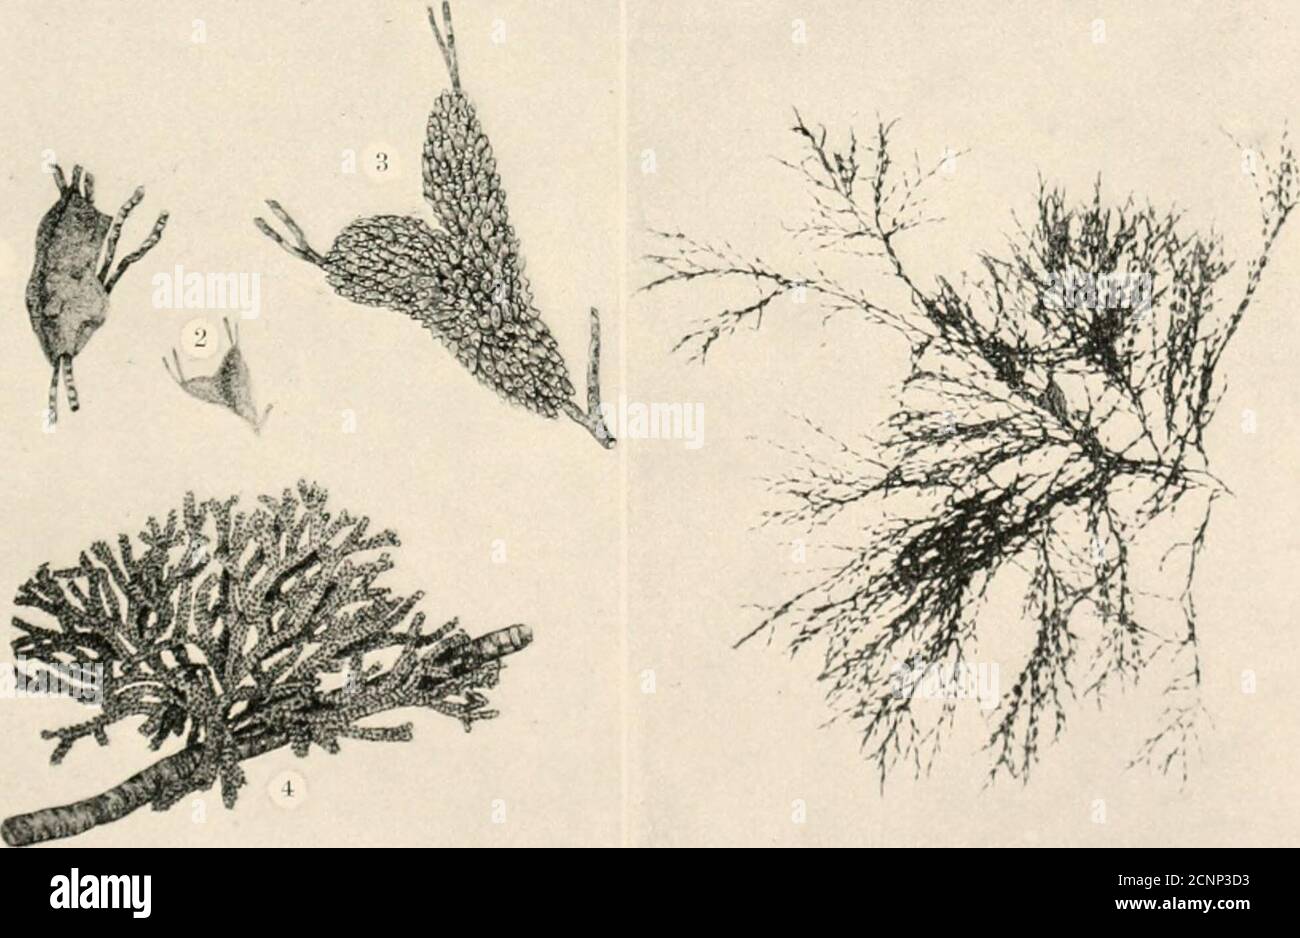 . The sea-beach at ebb-tide : a guide to the study of the seaweeds and the lower animal life found between tidemarks . m. i PLATE LI. (•lustra toliacca. 1. Flustra iiic-inliranacca ; ! . !!. !•. 1.  . (clicjiora |nmiii-osa. natural si/.r; branacea, magnified.3, 0. |iiniiic&lt;isa. niafriiificd; 4. (. raniulusa. Vesicularia didiutoma. POLYZOA 197 much smaller and narrower than those of M. pilosa ; easily distinguishedfrom that species by its manner of spreading and the absence of the onelong hair. Common from New Jersey northward. M. tennis. Common on pebbles, often covering their whole surface Stock Photo